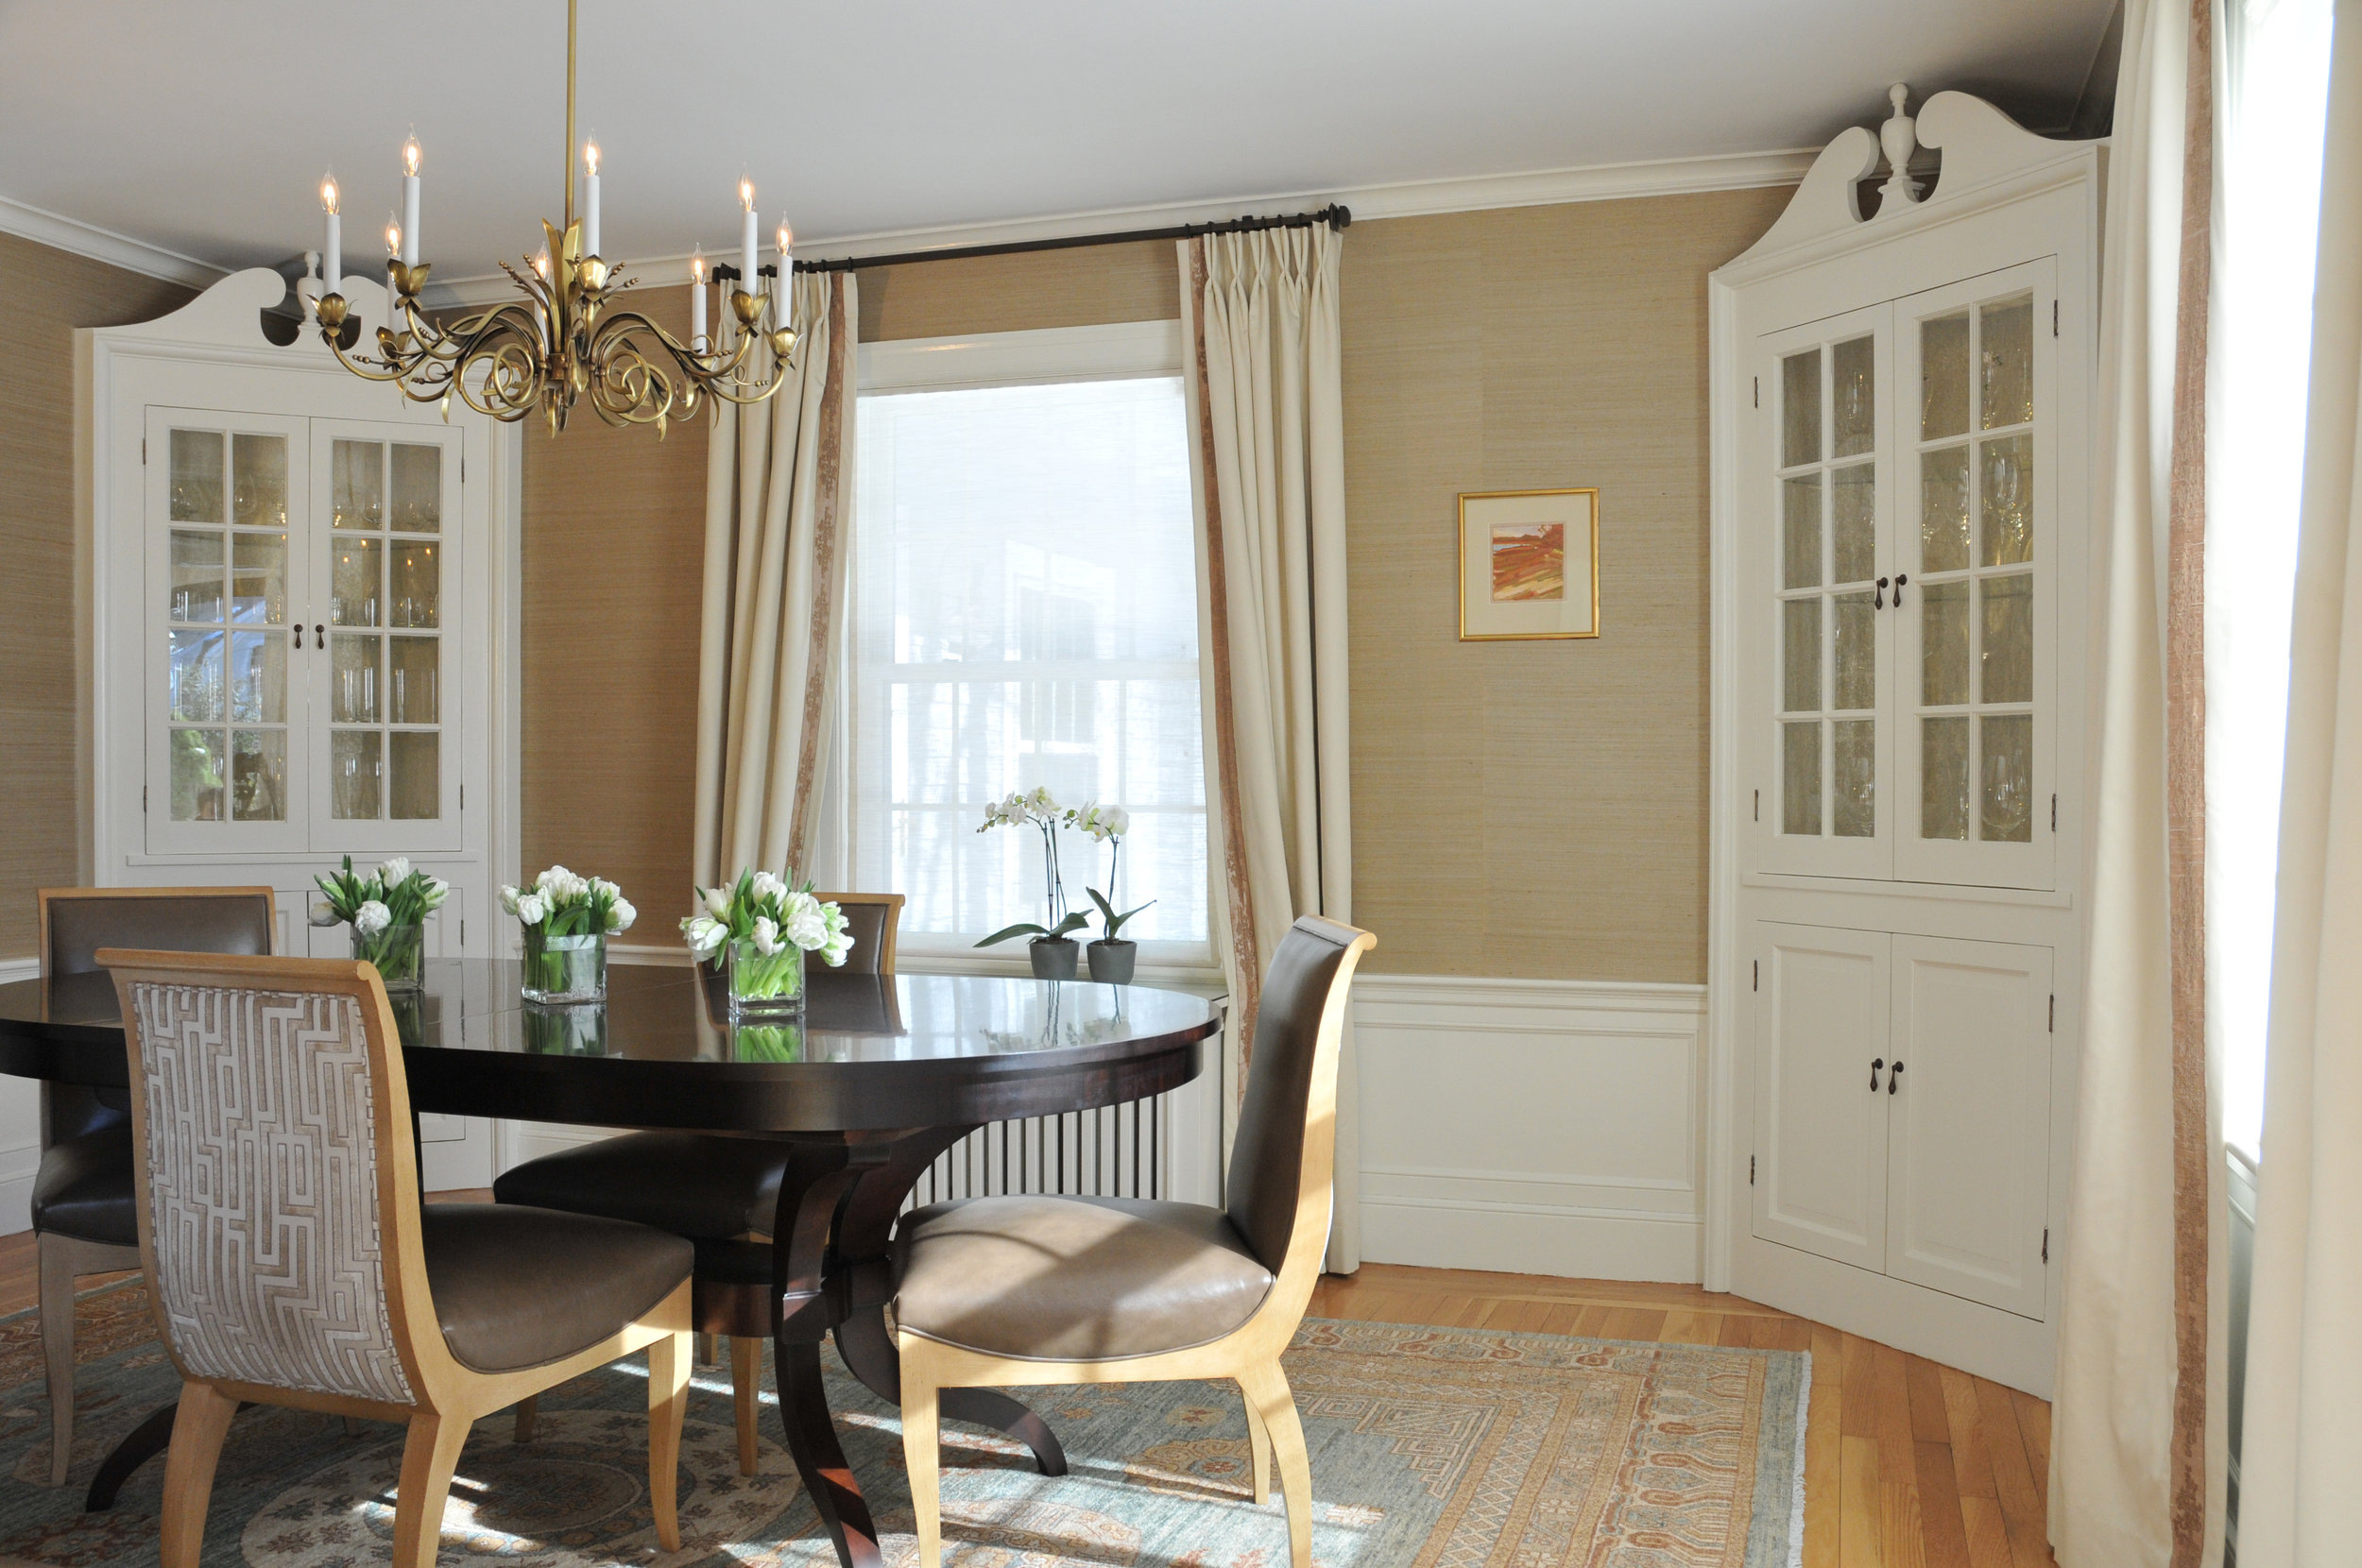 Dining Table with China Cabinets.jpg